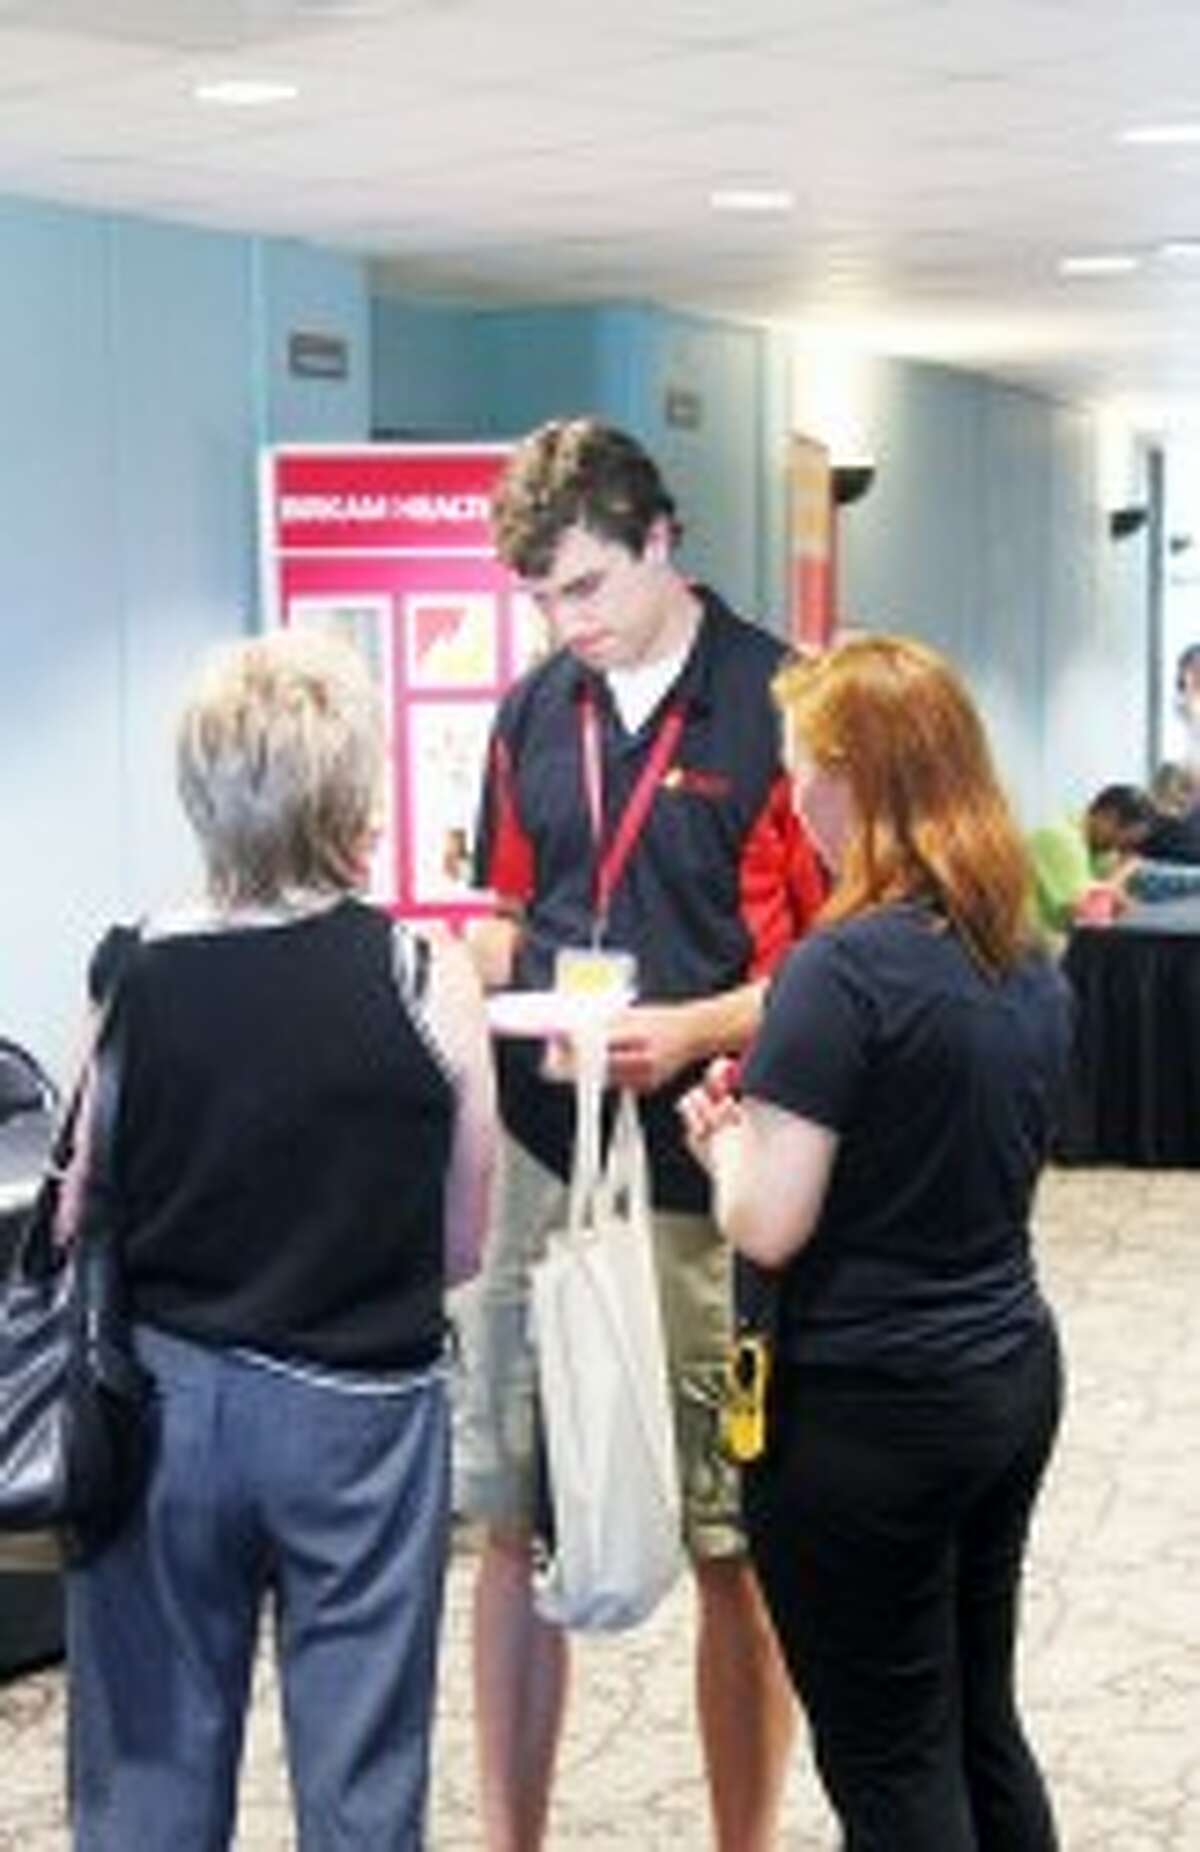 NEW TO FERRIS: A Ferris State University orientation leader talks to parents on Monday. During the orientation sessions, students and their friends and family have the chance to learn about their academic program, on-campus services and extracurricular activities at Ferris.